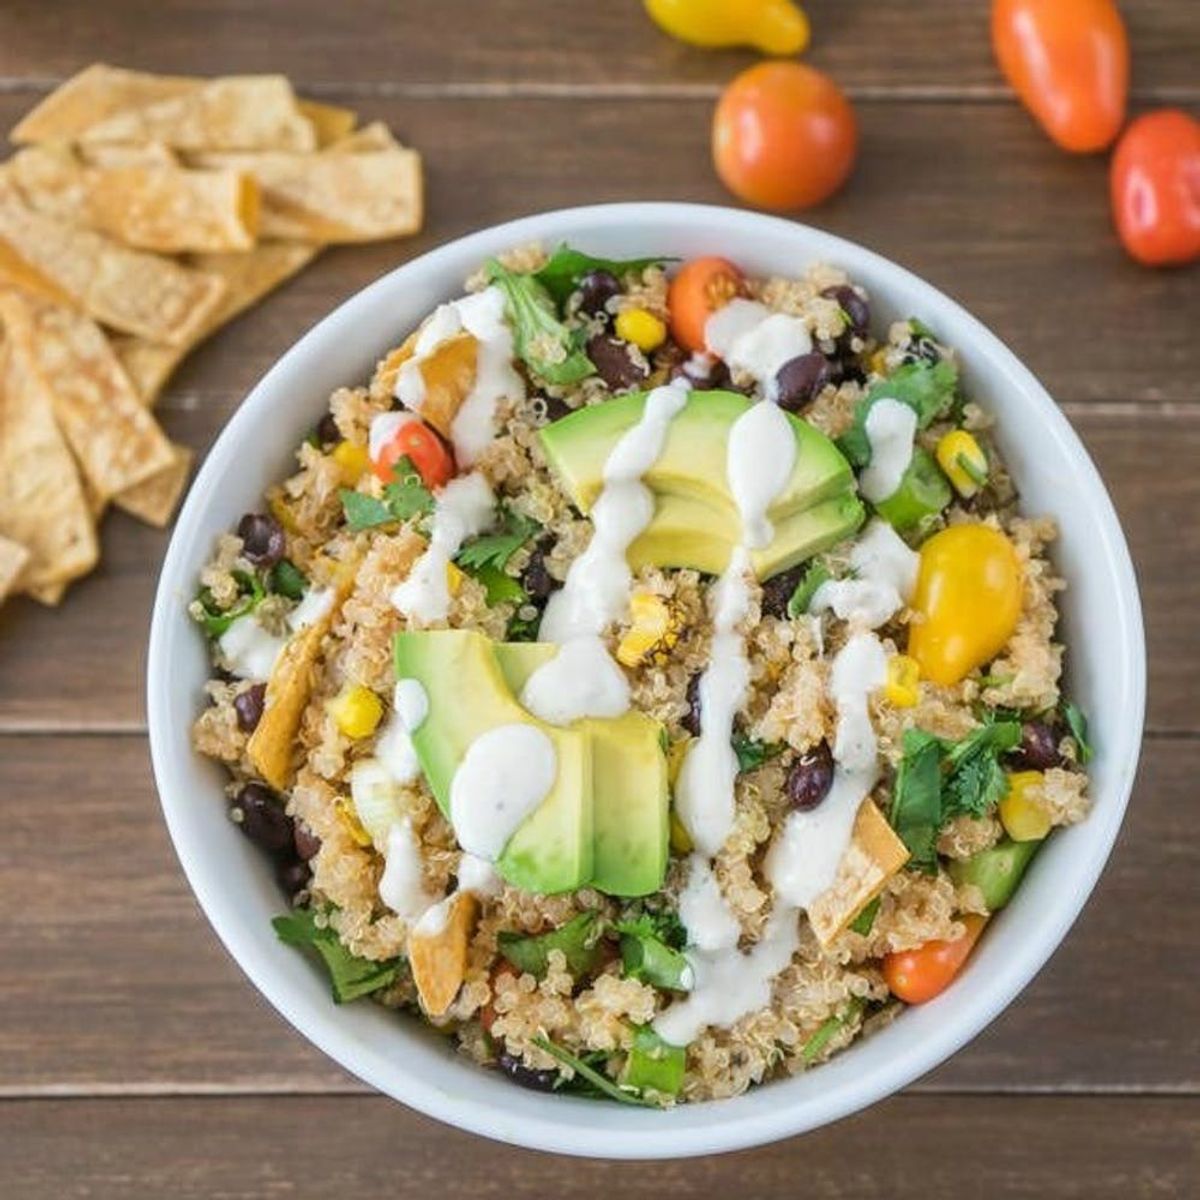 15 Great-Tasting Grain Bowls You Should Pack for Lunch